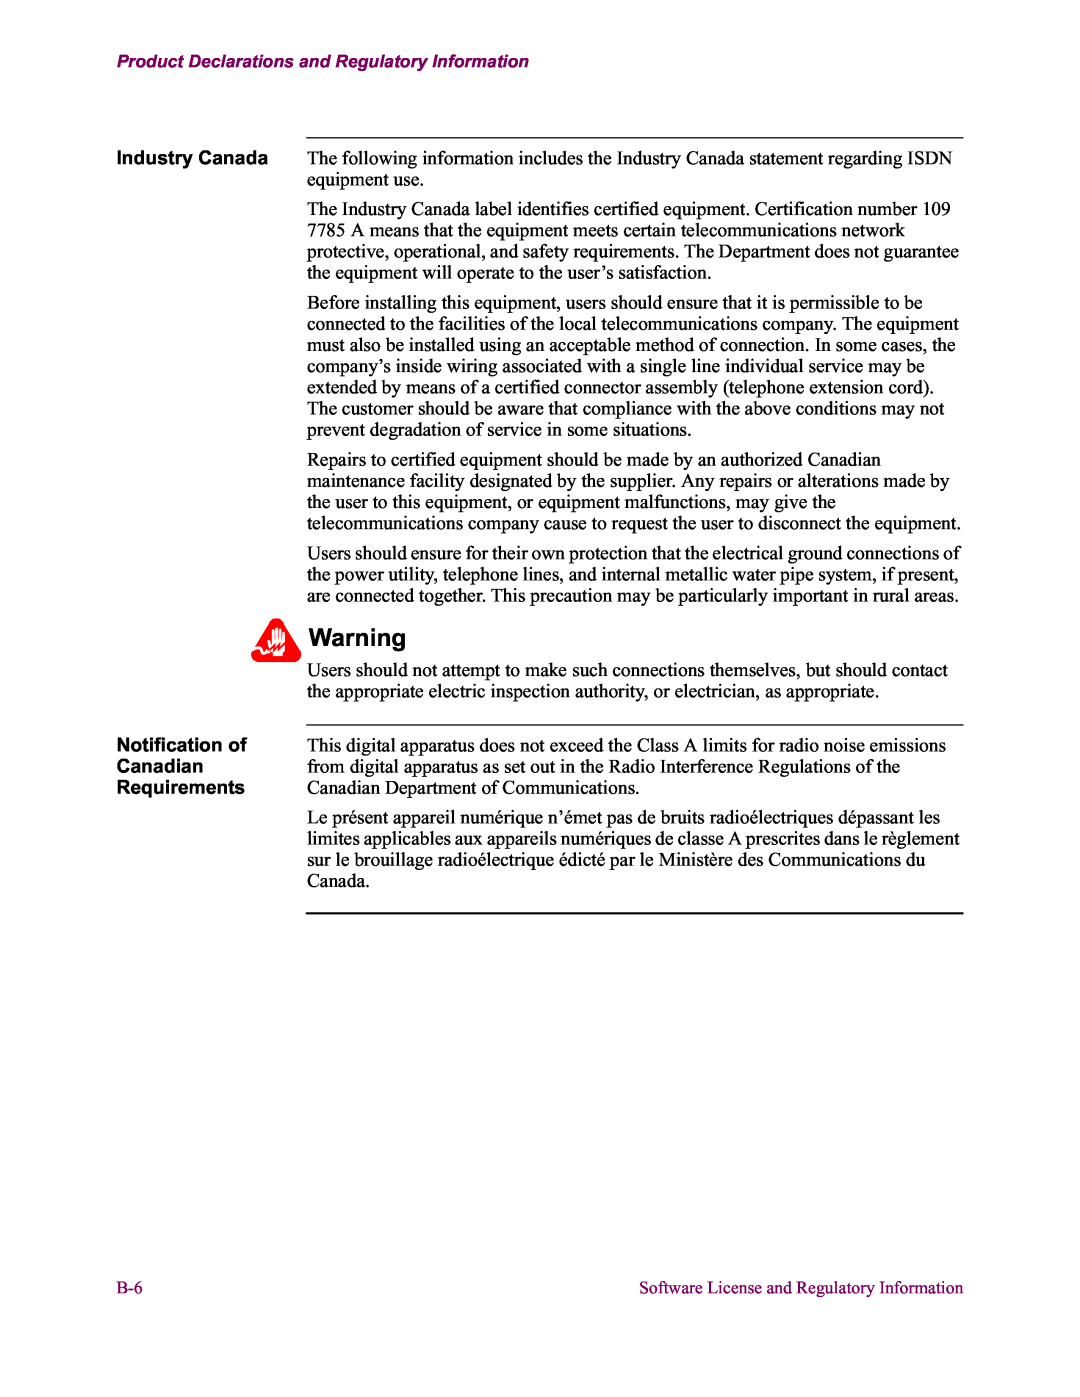 Vanguard Managed Solutions 650 installation manual Requirements Canadian Department of Communications 